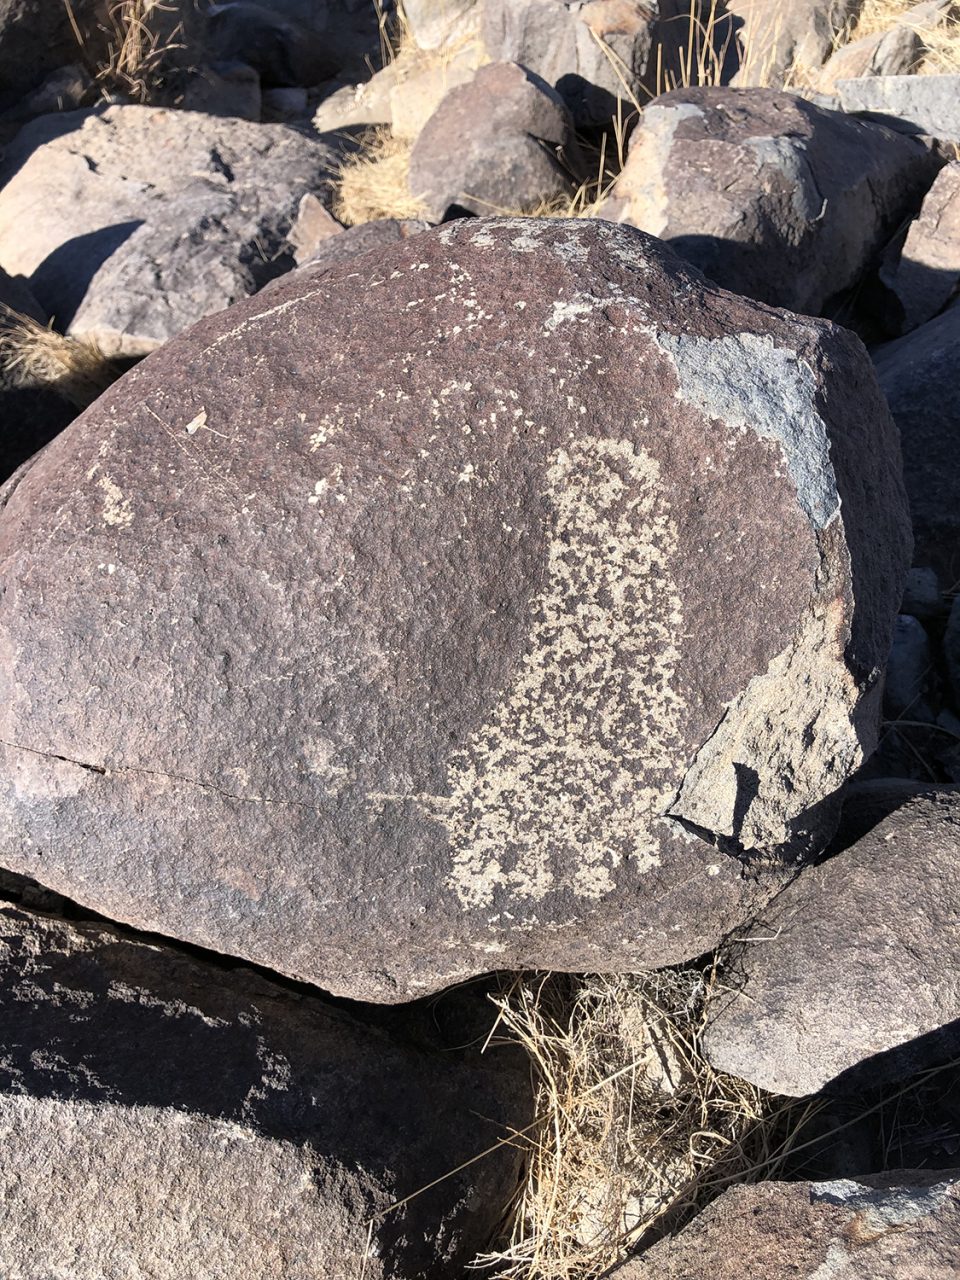 Representation of a human foot carved into the surface of a boulder at Three Rivers Petroglyph Site in New Mexico. Photograph by Keith Dotson. Copyright 2022.